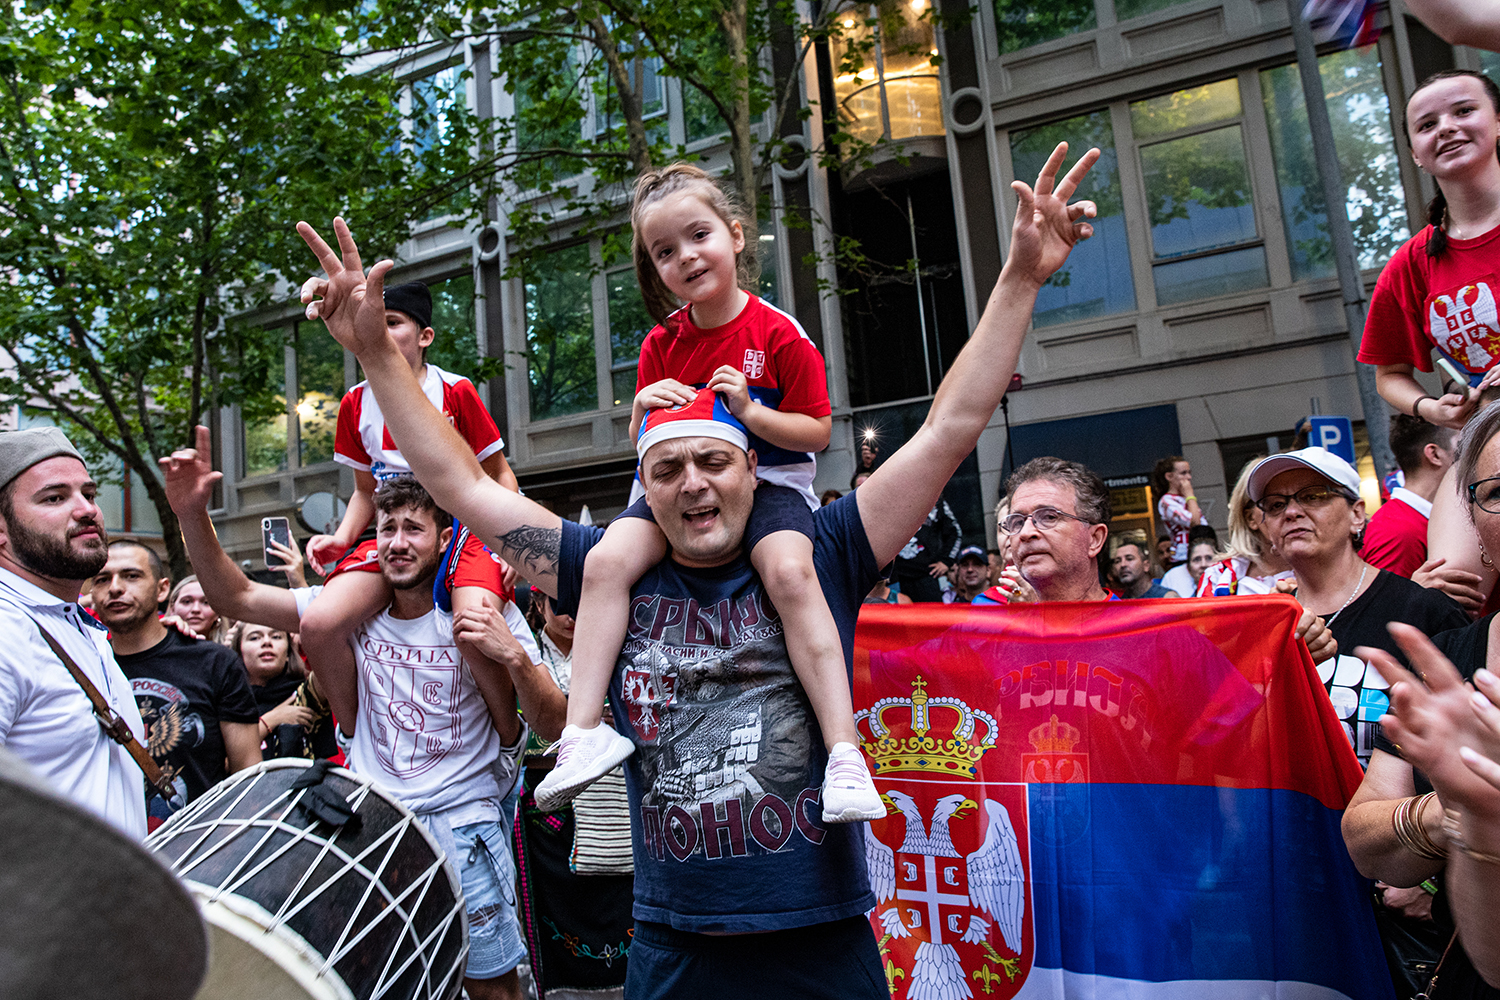 Serbian tennis fans celebrate at Collins Street as they wait for Djokovic to leave on January 10, 2022 in Melbourne, Australia. 